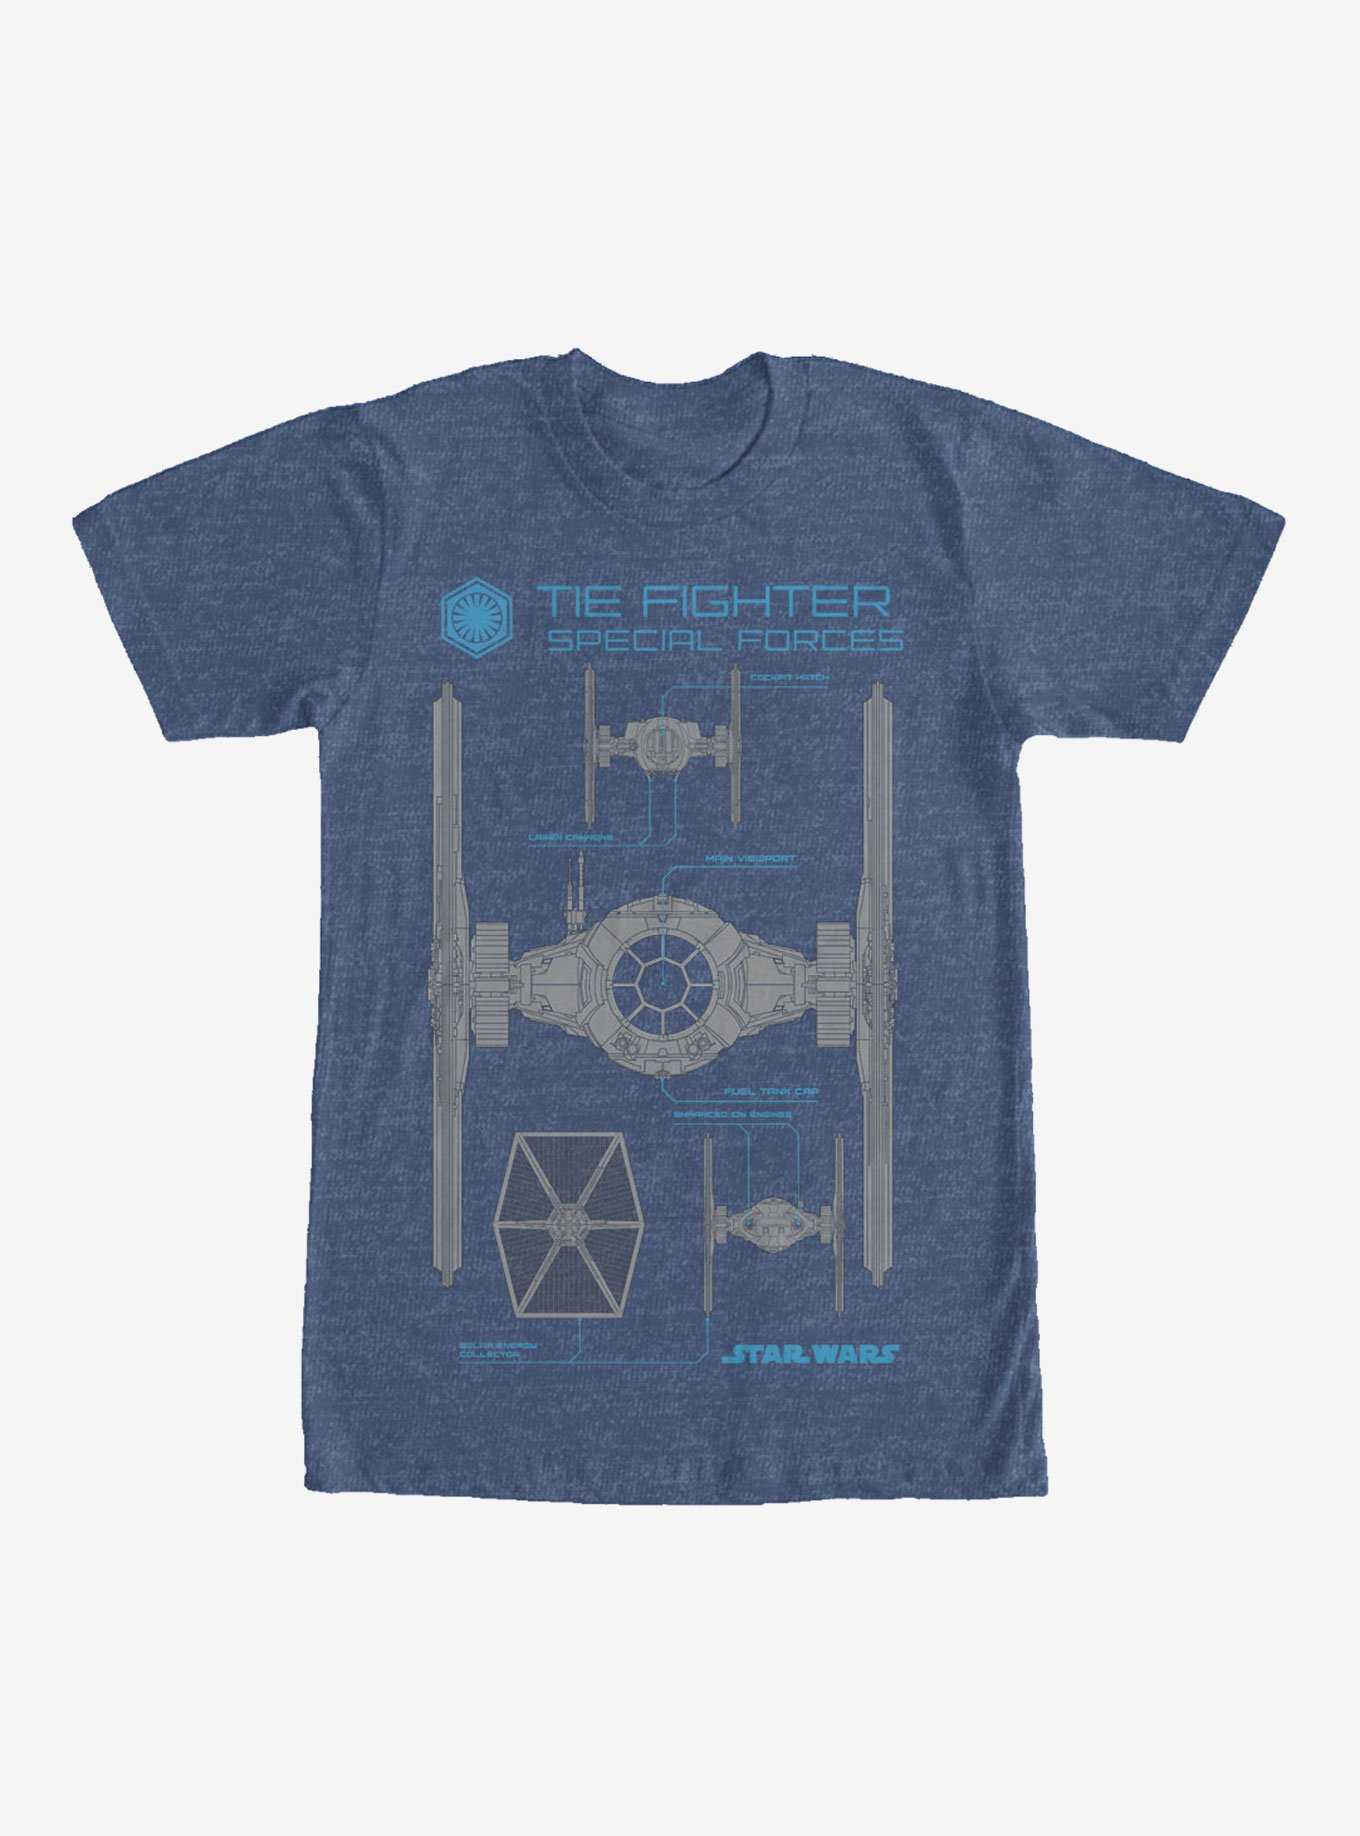 Star Wars TIE Fighter Special Forces T-Shirt, , hi-res